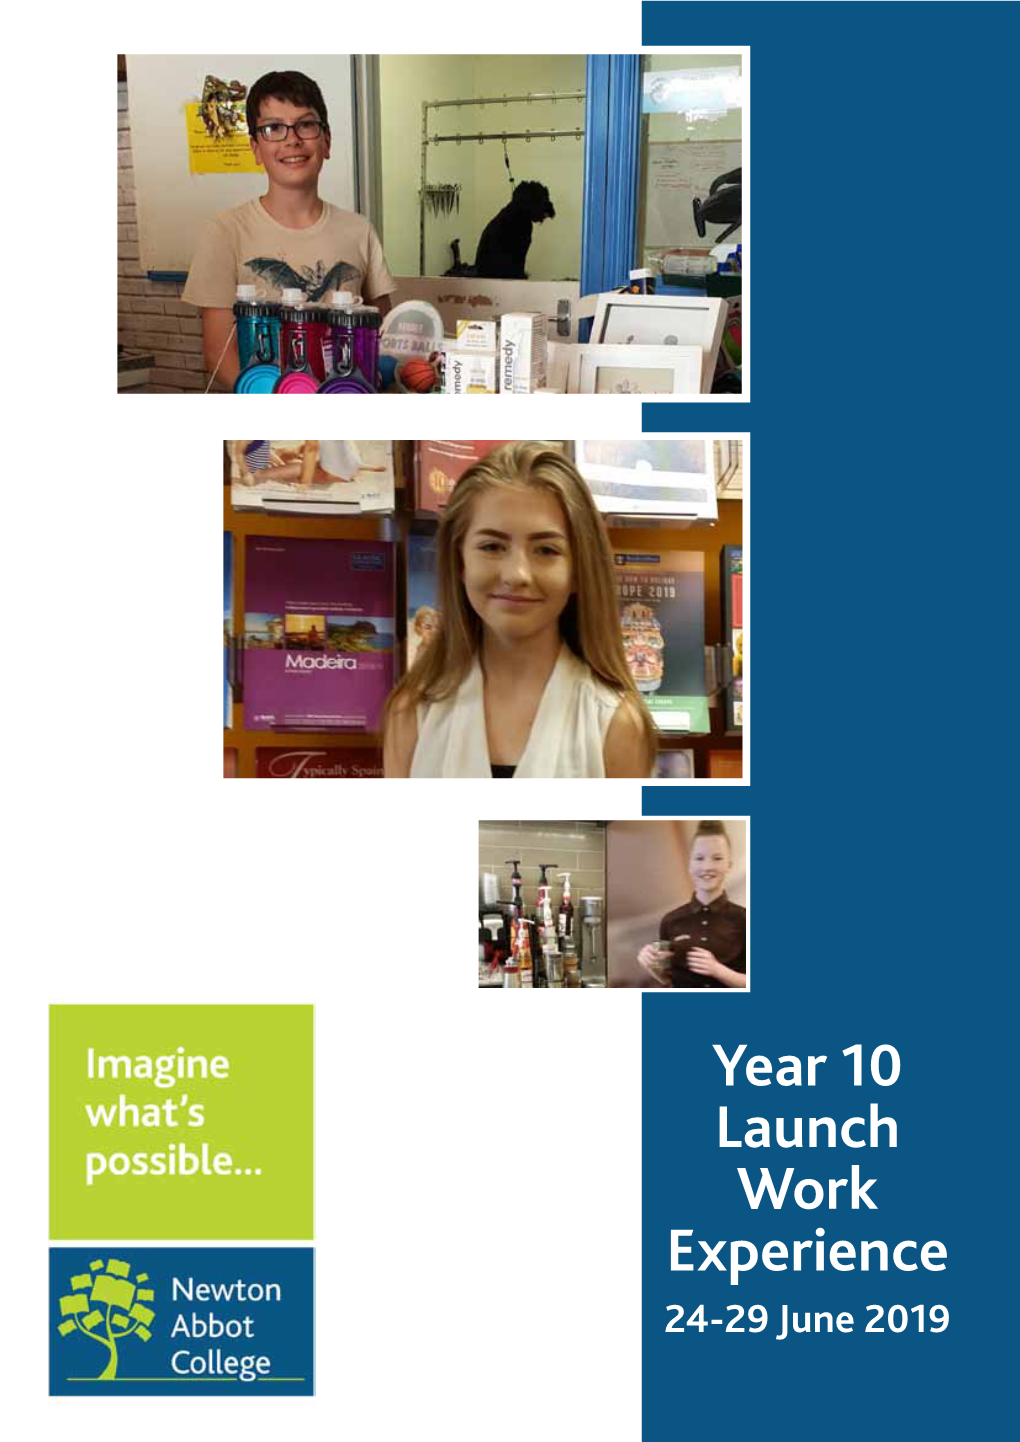 Year 10 Launch Work Experience 24-29 June 2019